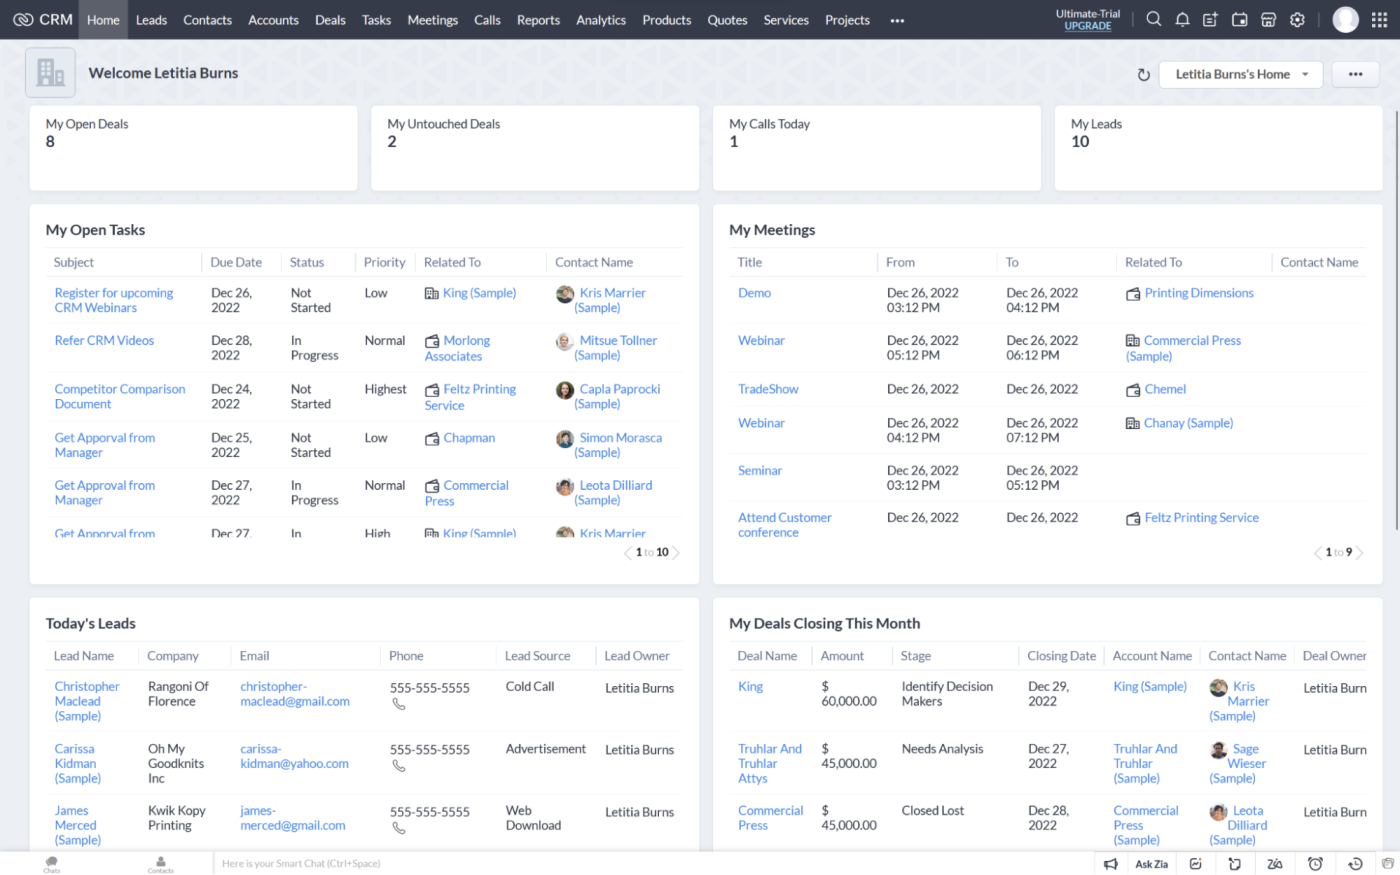 Zoho CRM, our pick for the best CRM for scaling your small business